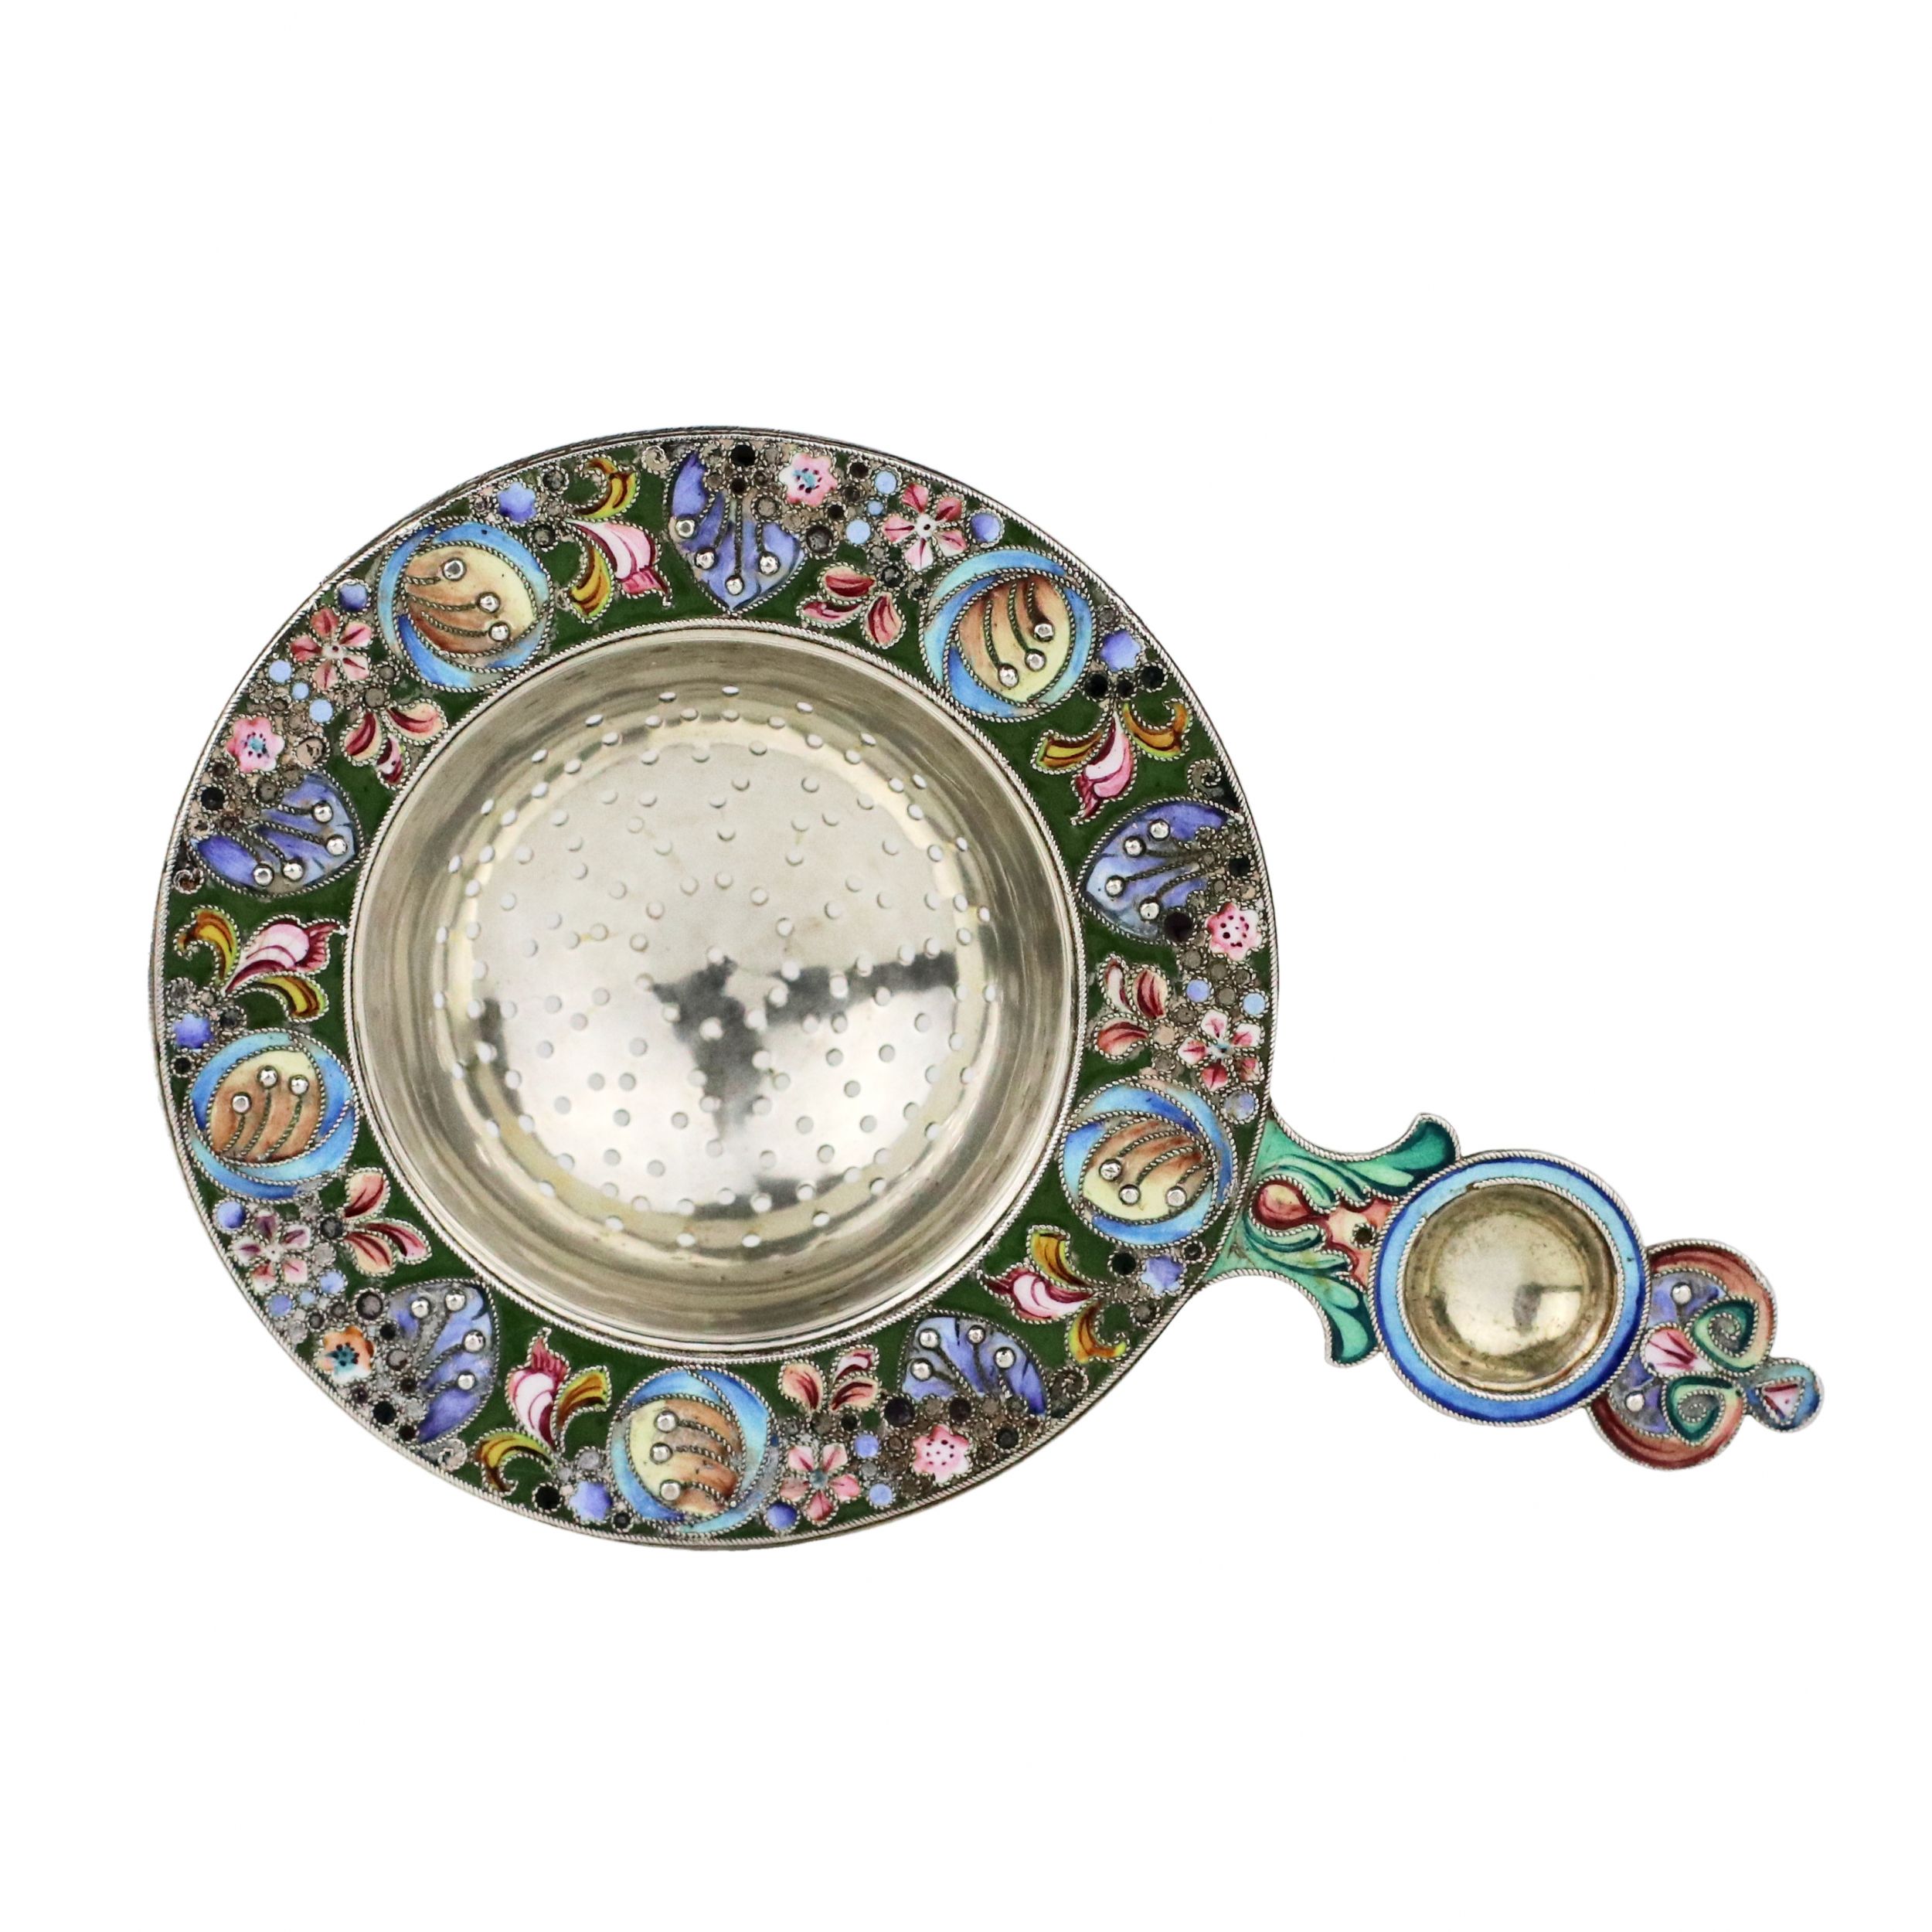 Russian-silver-tea-strainer-with-enamel-decor-in-the-spirit-of-Russian-Art-Nouveau-